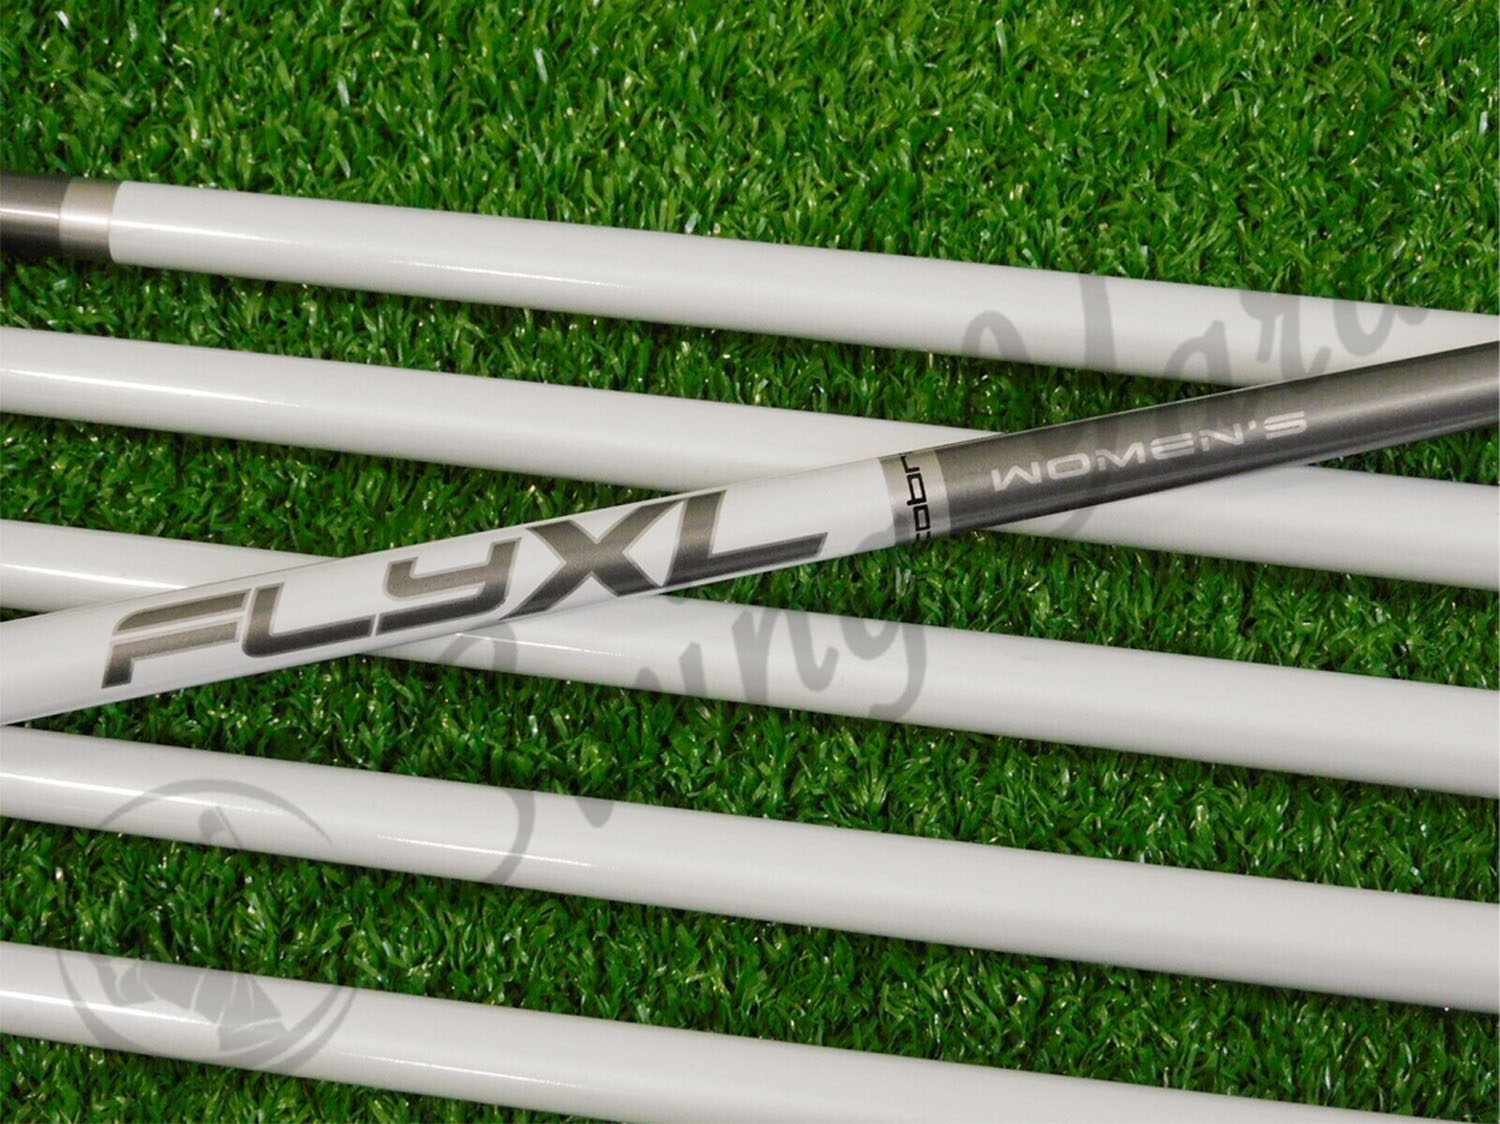 The shaft of Cobra Fly XL iron at the range